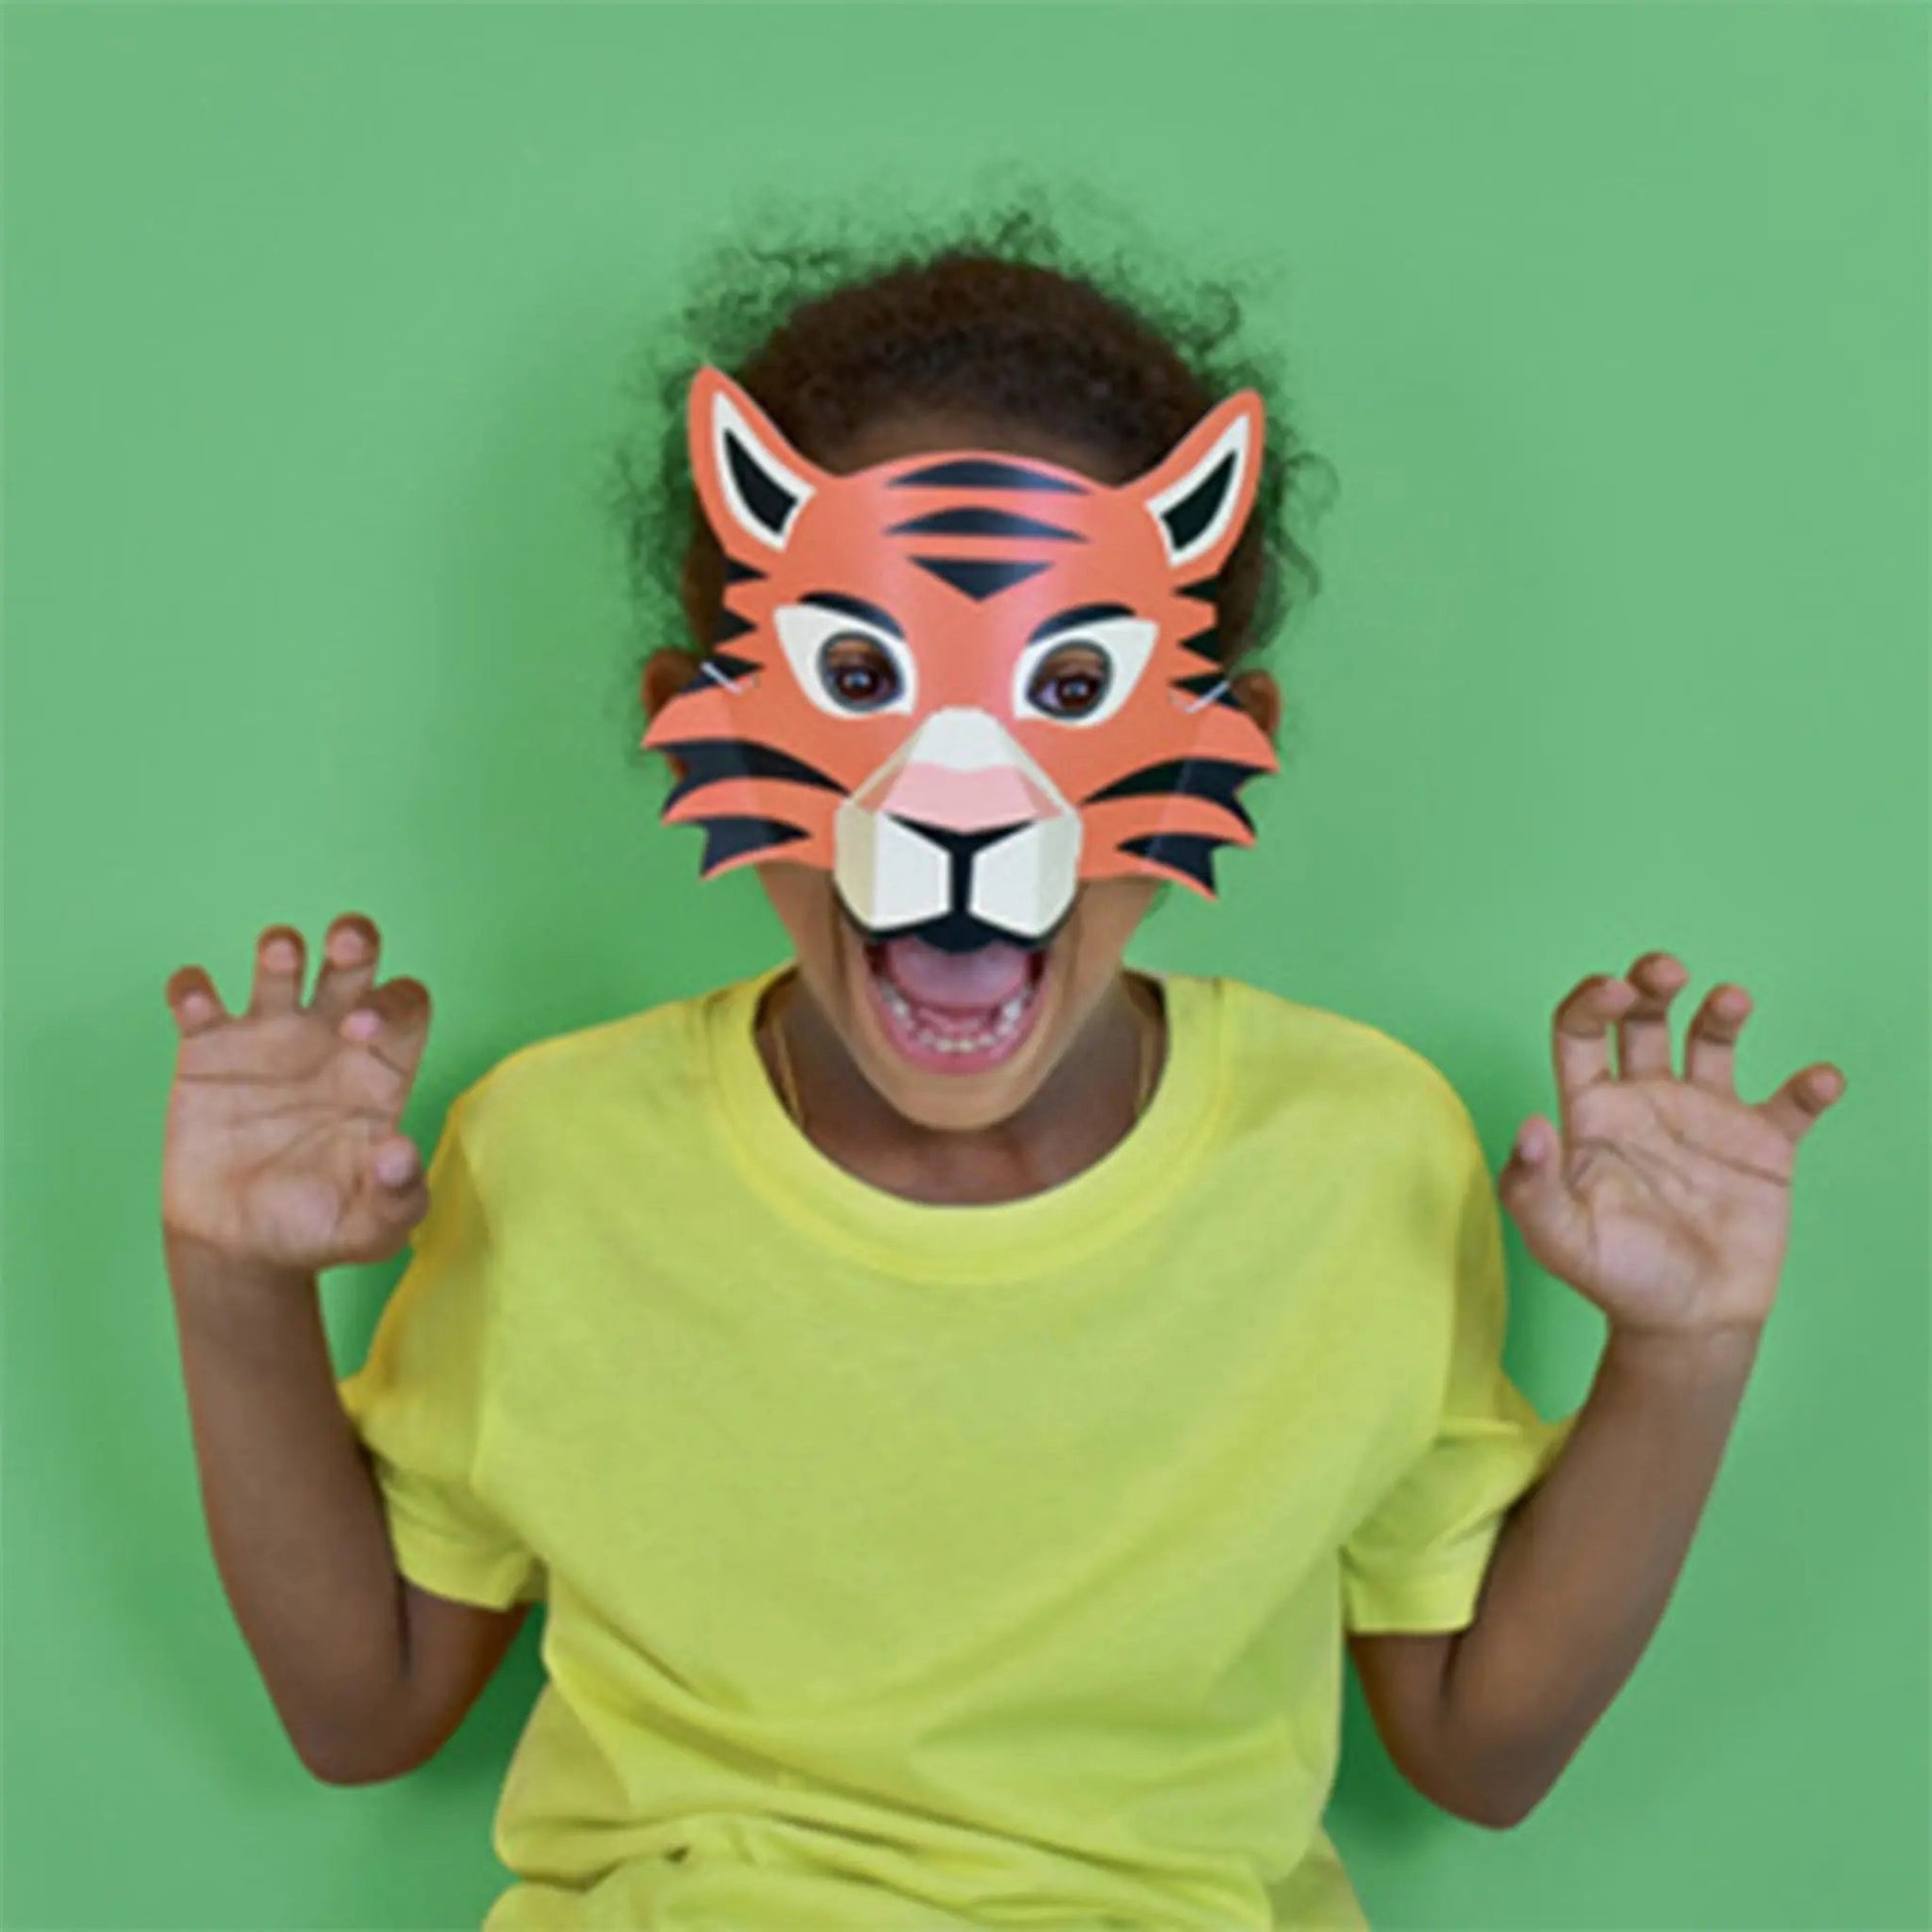 Create your own Jungle Animal Masks - Clockwork Soldier - The Forgotten Toy Shop